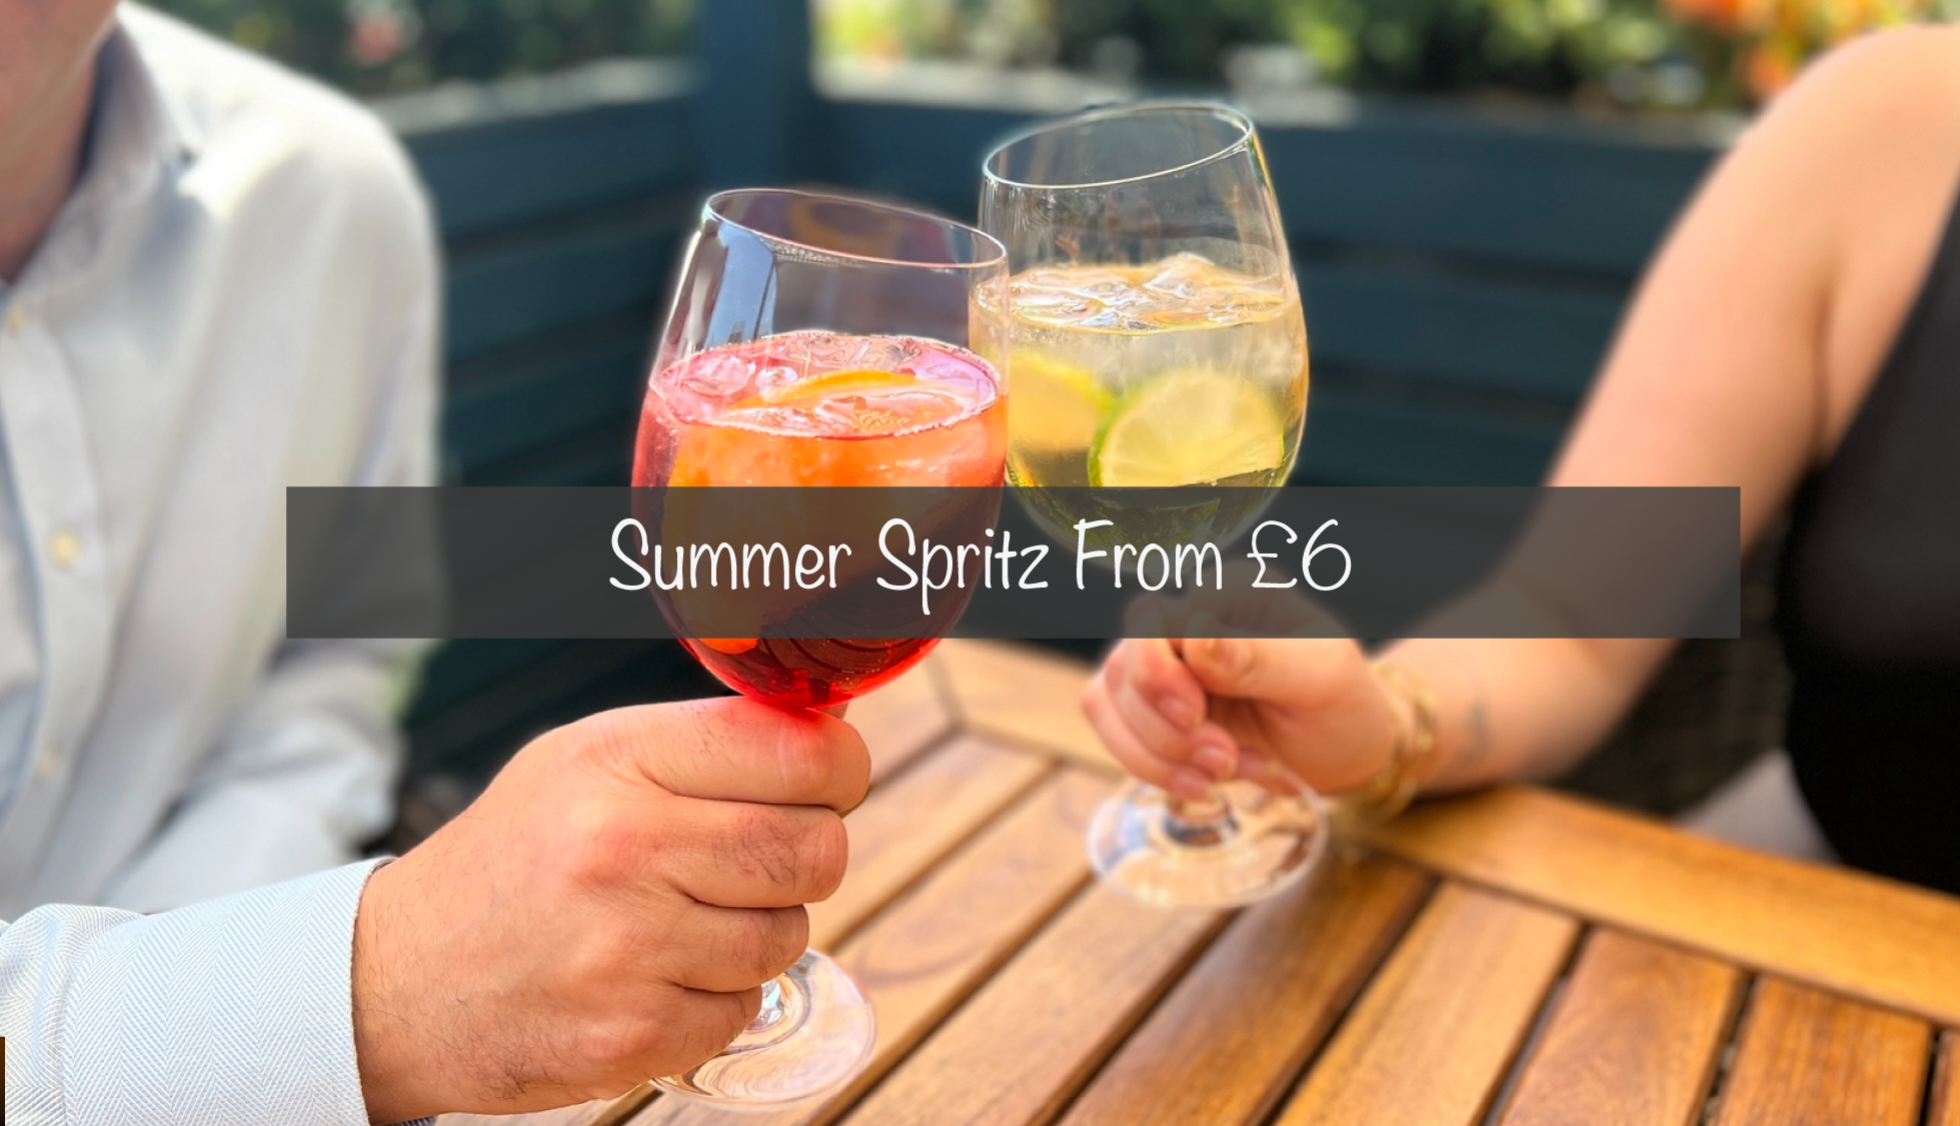 Spritz from £6 cocktail offer at the Bunk Inn